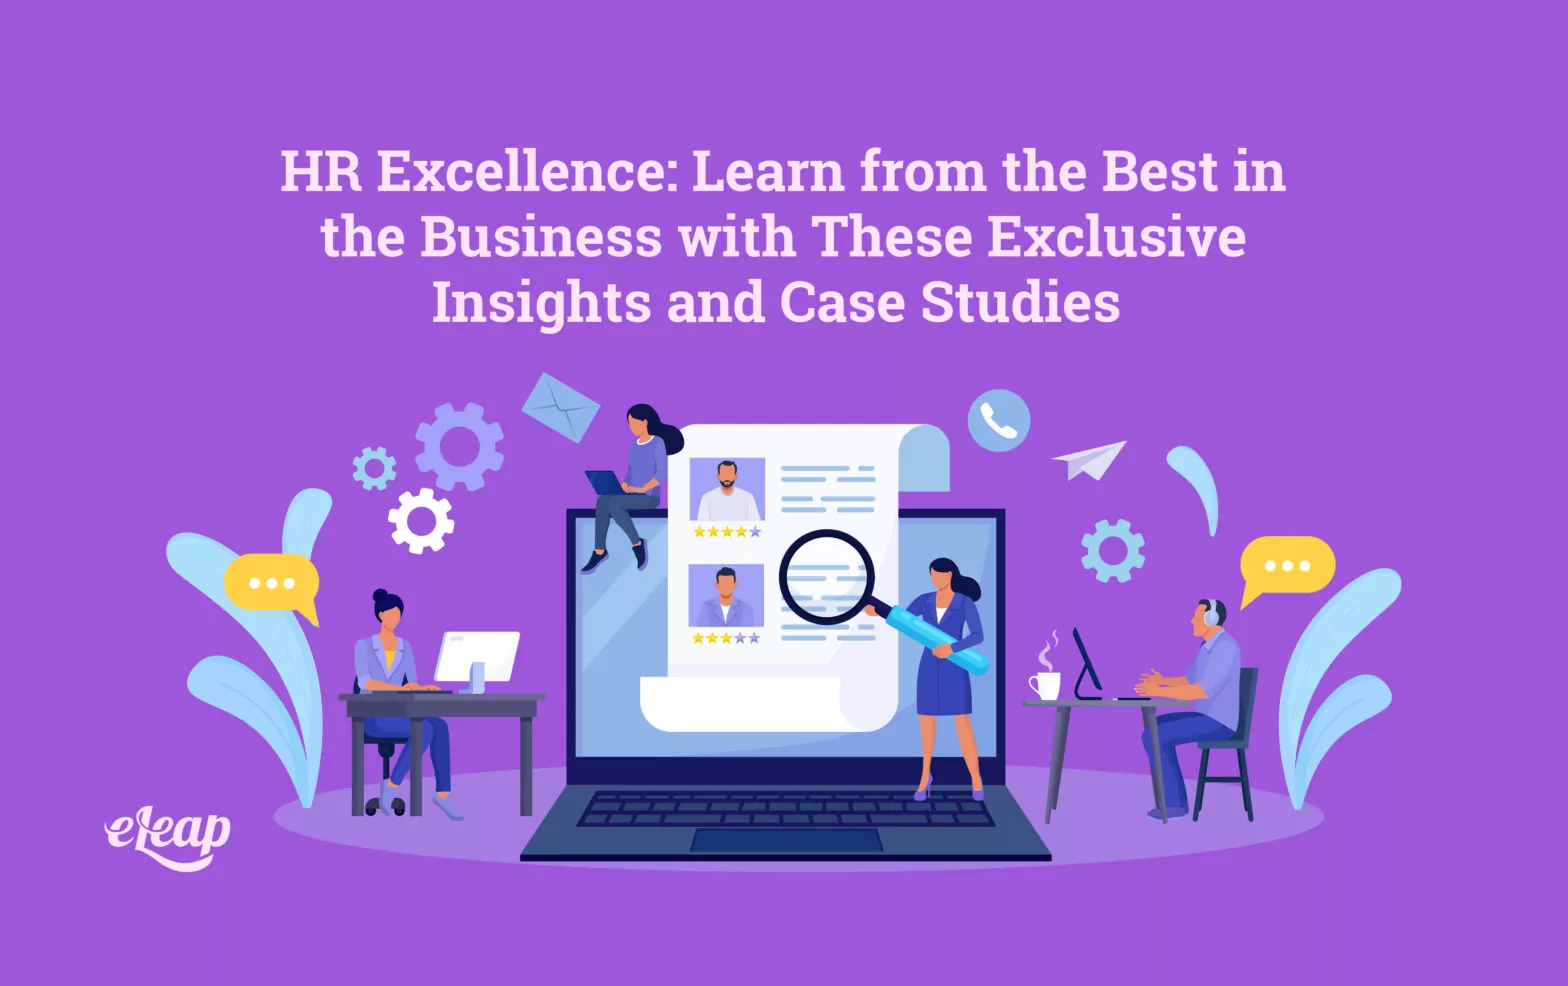 HR Excellence: Learn from the Best in the Business